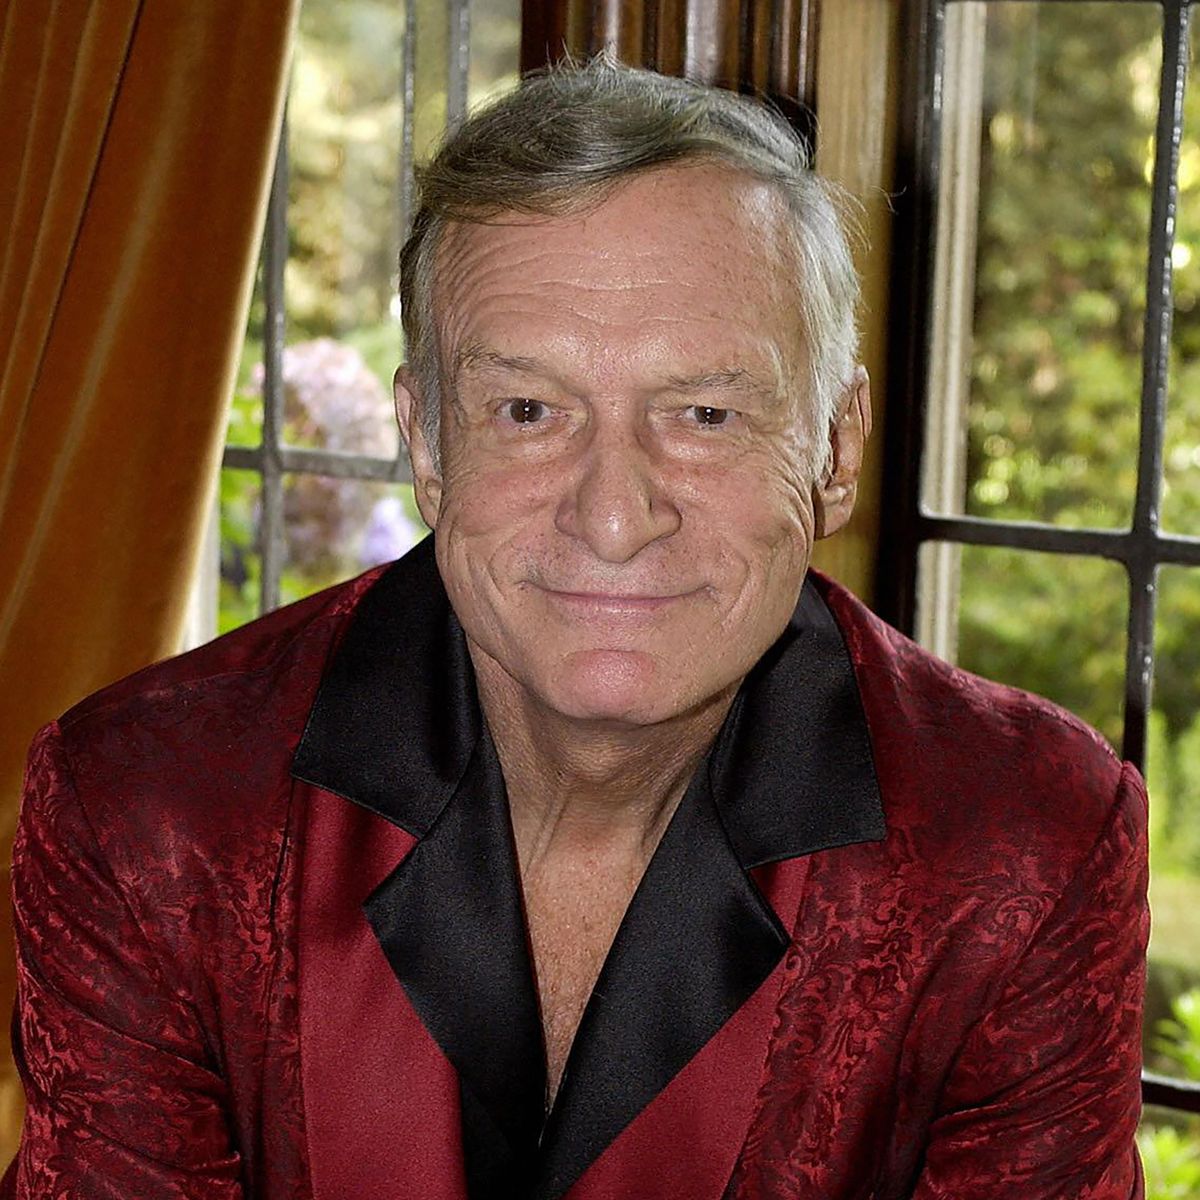 Playboy magazine founder Hugh Hefner posLOS ANGELES, UNITED STATES: Playboy magazine founder Hugh Hefner poses at his Los Angeles, California home, 19 November, 2003. Fifty years after Hefner launched Playboy and a sexual revolution, the pop culture icon is moving to reinvent its 'Swinging 60s' image for a new generation of pleasure seekers. From an idea born on Hefner's Chicago kitchen table, Playboy has become a huge business empire and one of the world's most recognisable brands. With its centre-fold pinups, the magazine has evolved from what was regarded as smut into a glamor publication that Sharon Stone, Cindy Crawford and Kim Basinger and other stars clamoured to pose nude for. Playboy will be celebrating its 50th Anniversary this December. AFP PHOTO/RICH SCHMITT (Photo credit should read RICH SCHMITT/AFP via Getty Images)